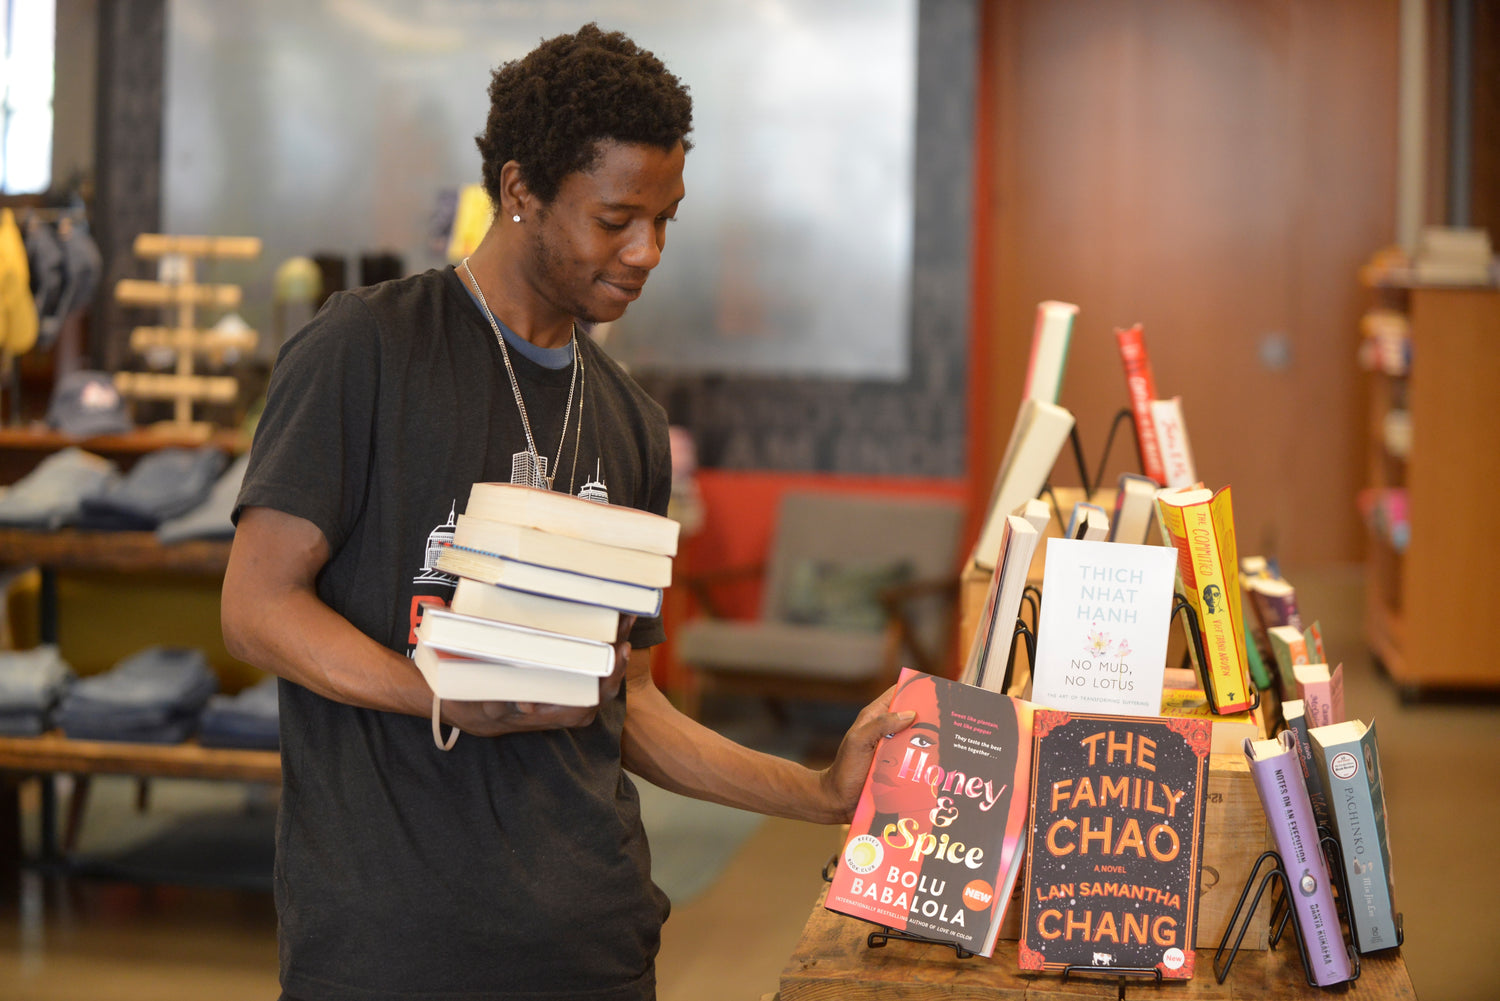 A youth from More than Words stands before a bookshelf filled with books, showcasing a diverse collection of literary works